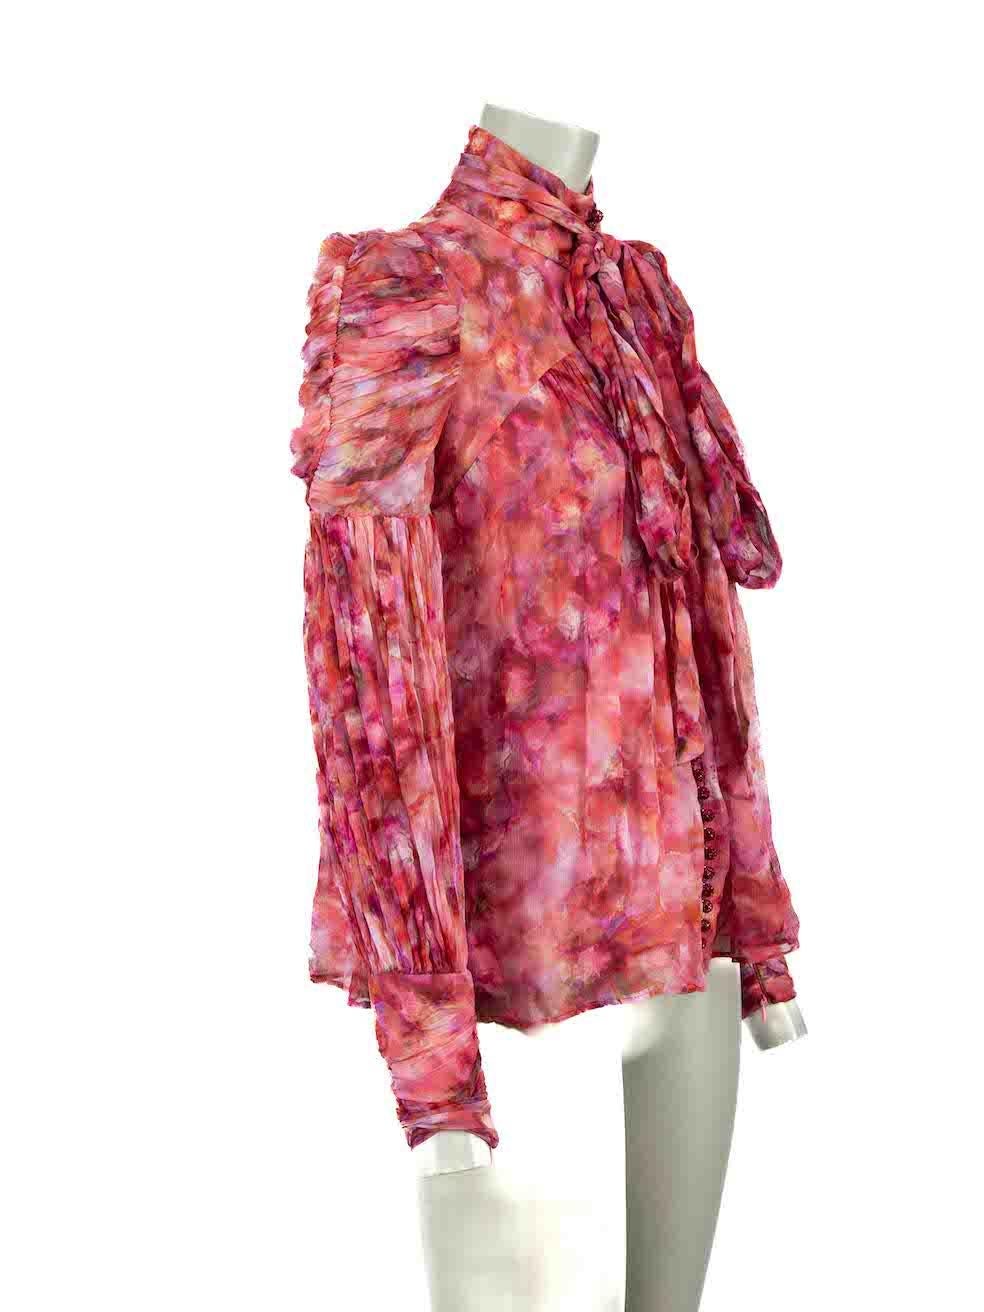 CONDITION is Very good. Minimal wear to blouse is evident. Minimal wear to tie strap where a small hole and loose strings are evident on this used Zimmermann designer resale item.
 
Details
Pink
Viscose
Blouse
Long sleeves
Mock neck
Button up